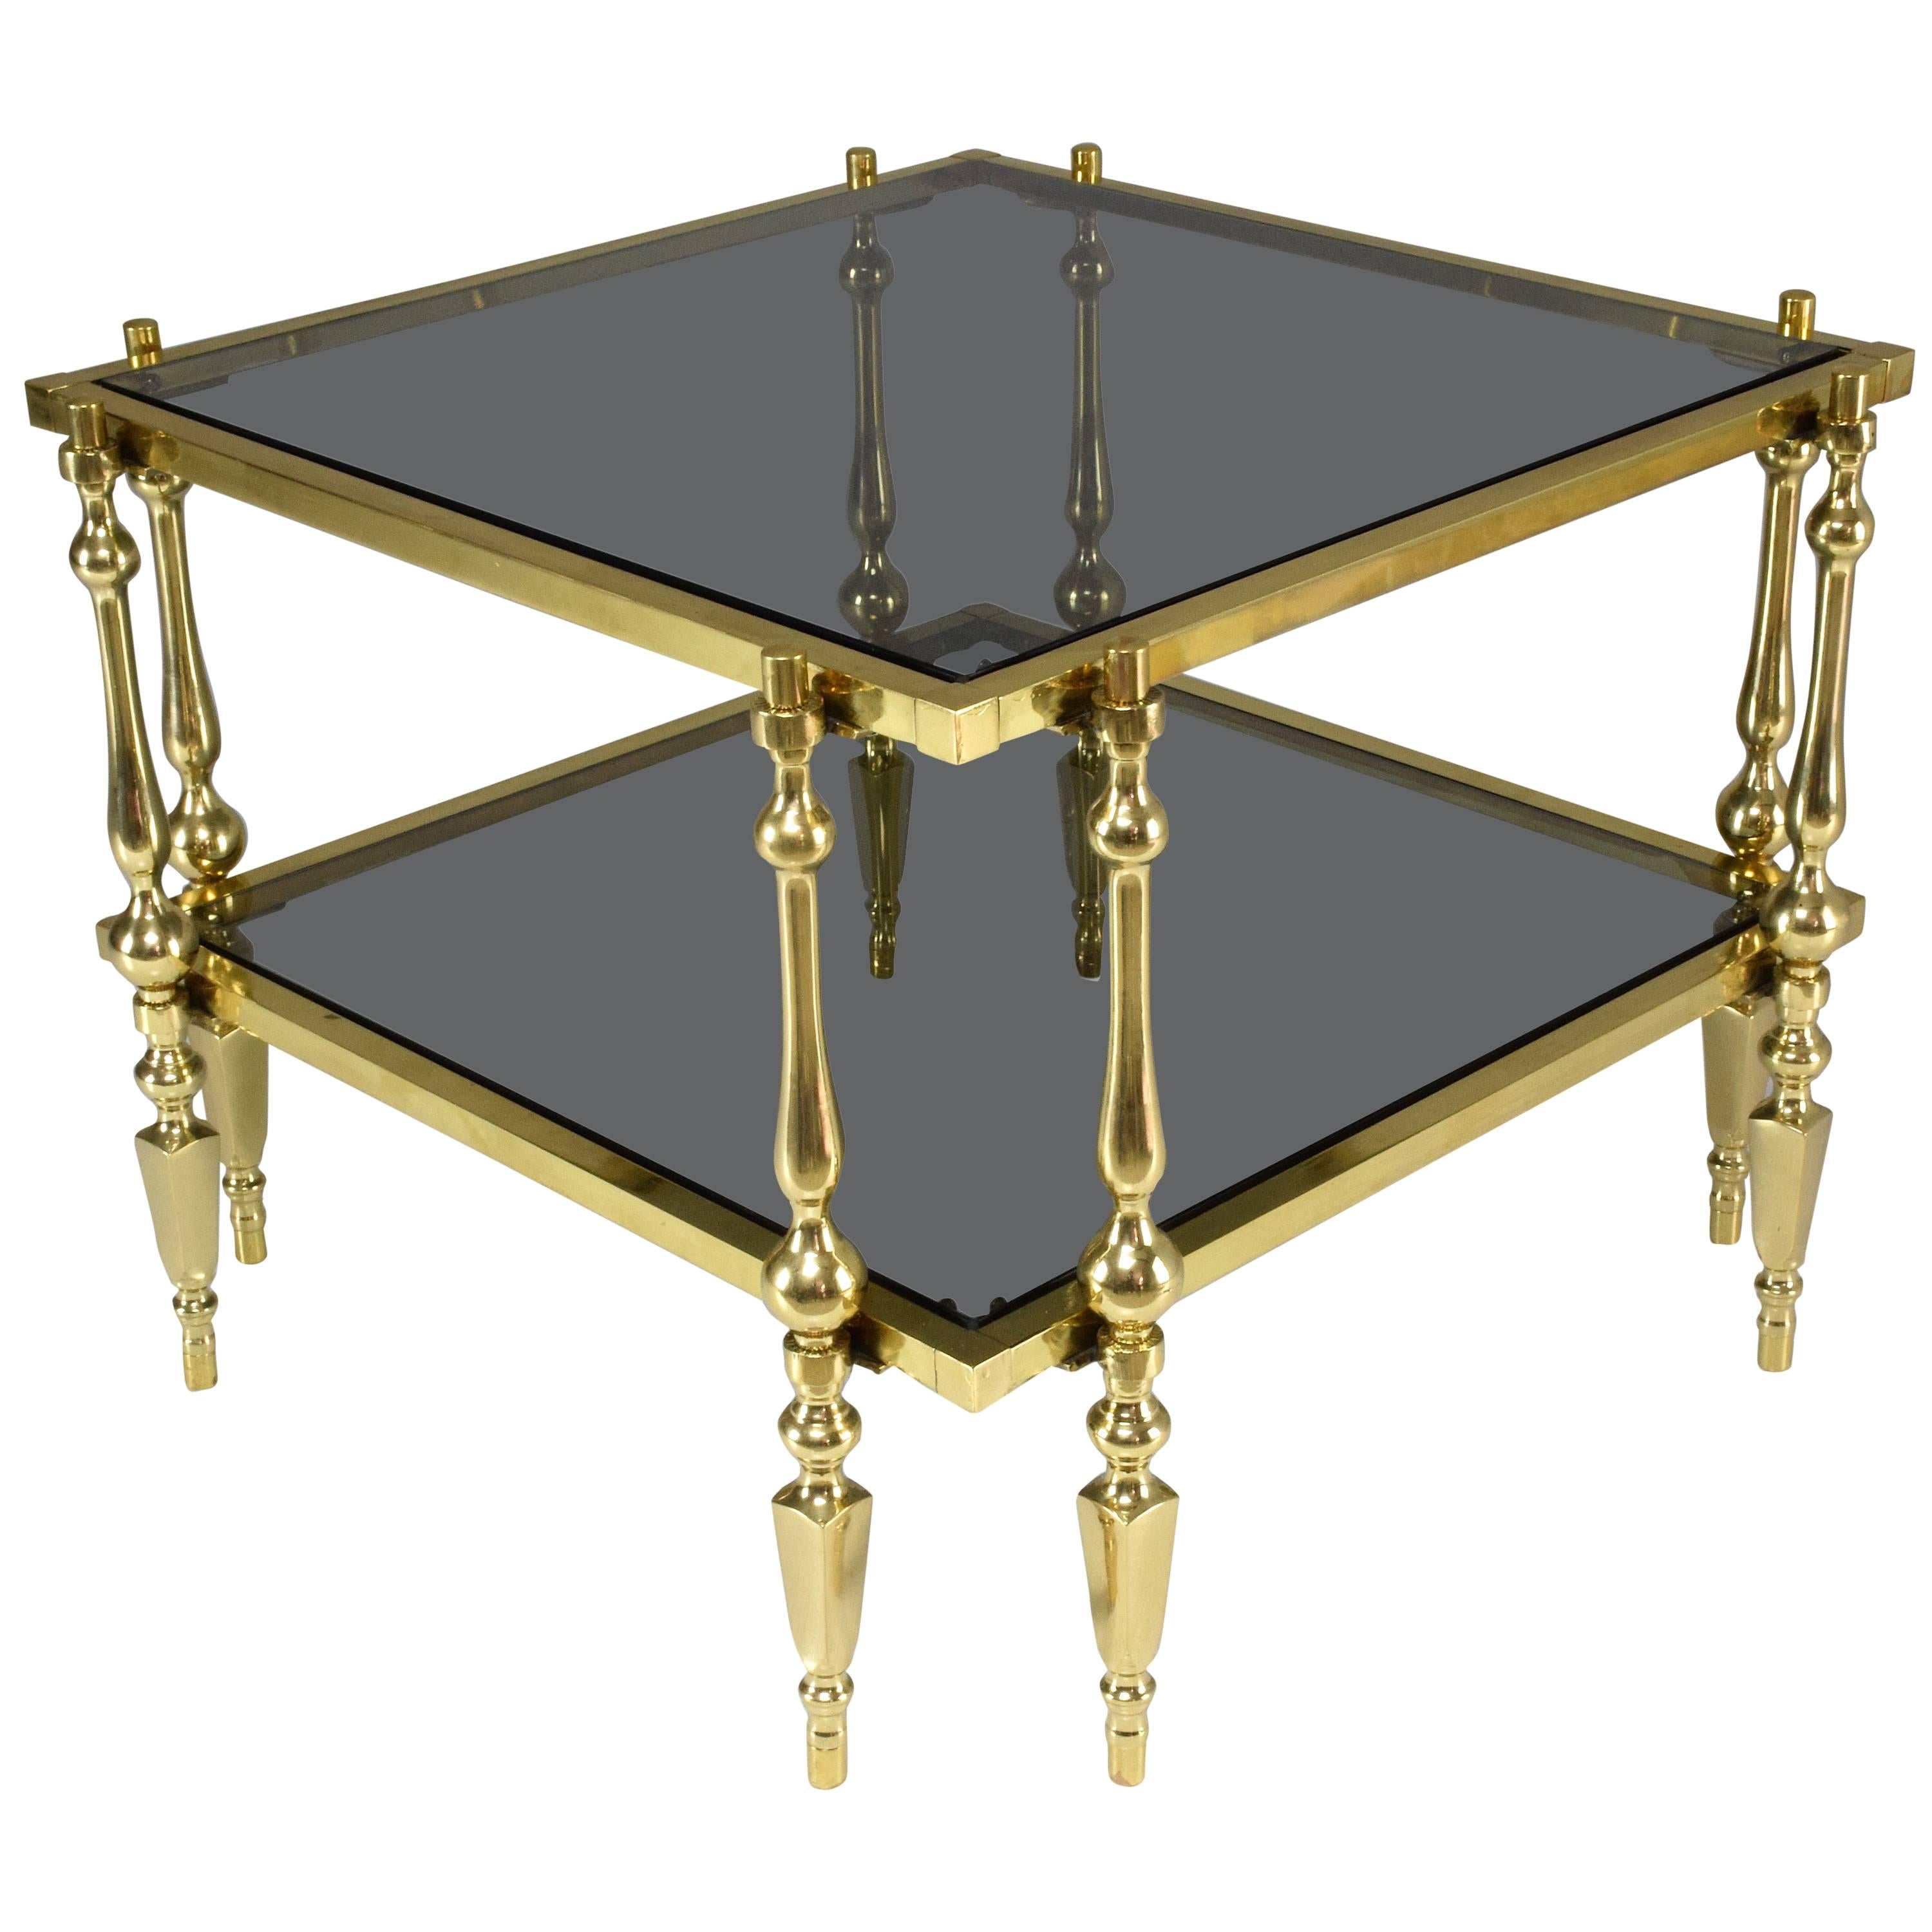 A French late 20th century vintage square two-tiered coffee or side table designed with a solid polished gold brass structure, smoked glass and intricate double sided fluted legs with spherical designs all-over.
In restored condition with original